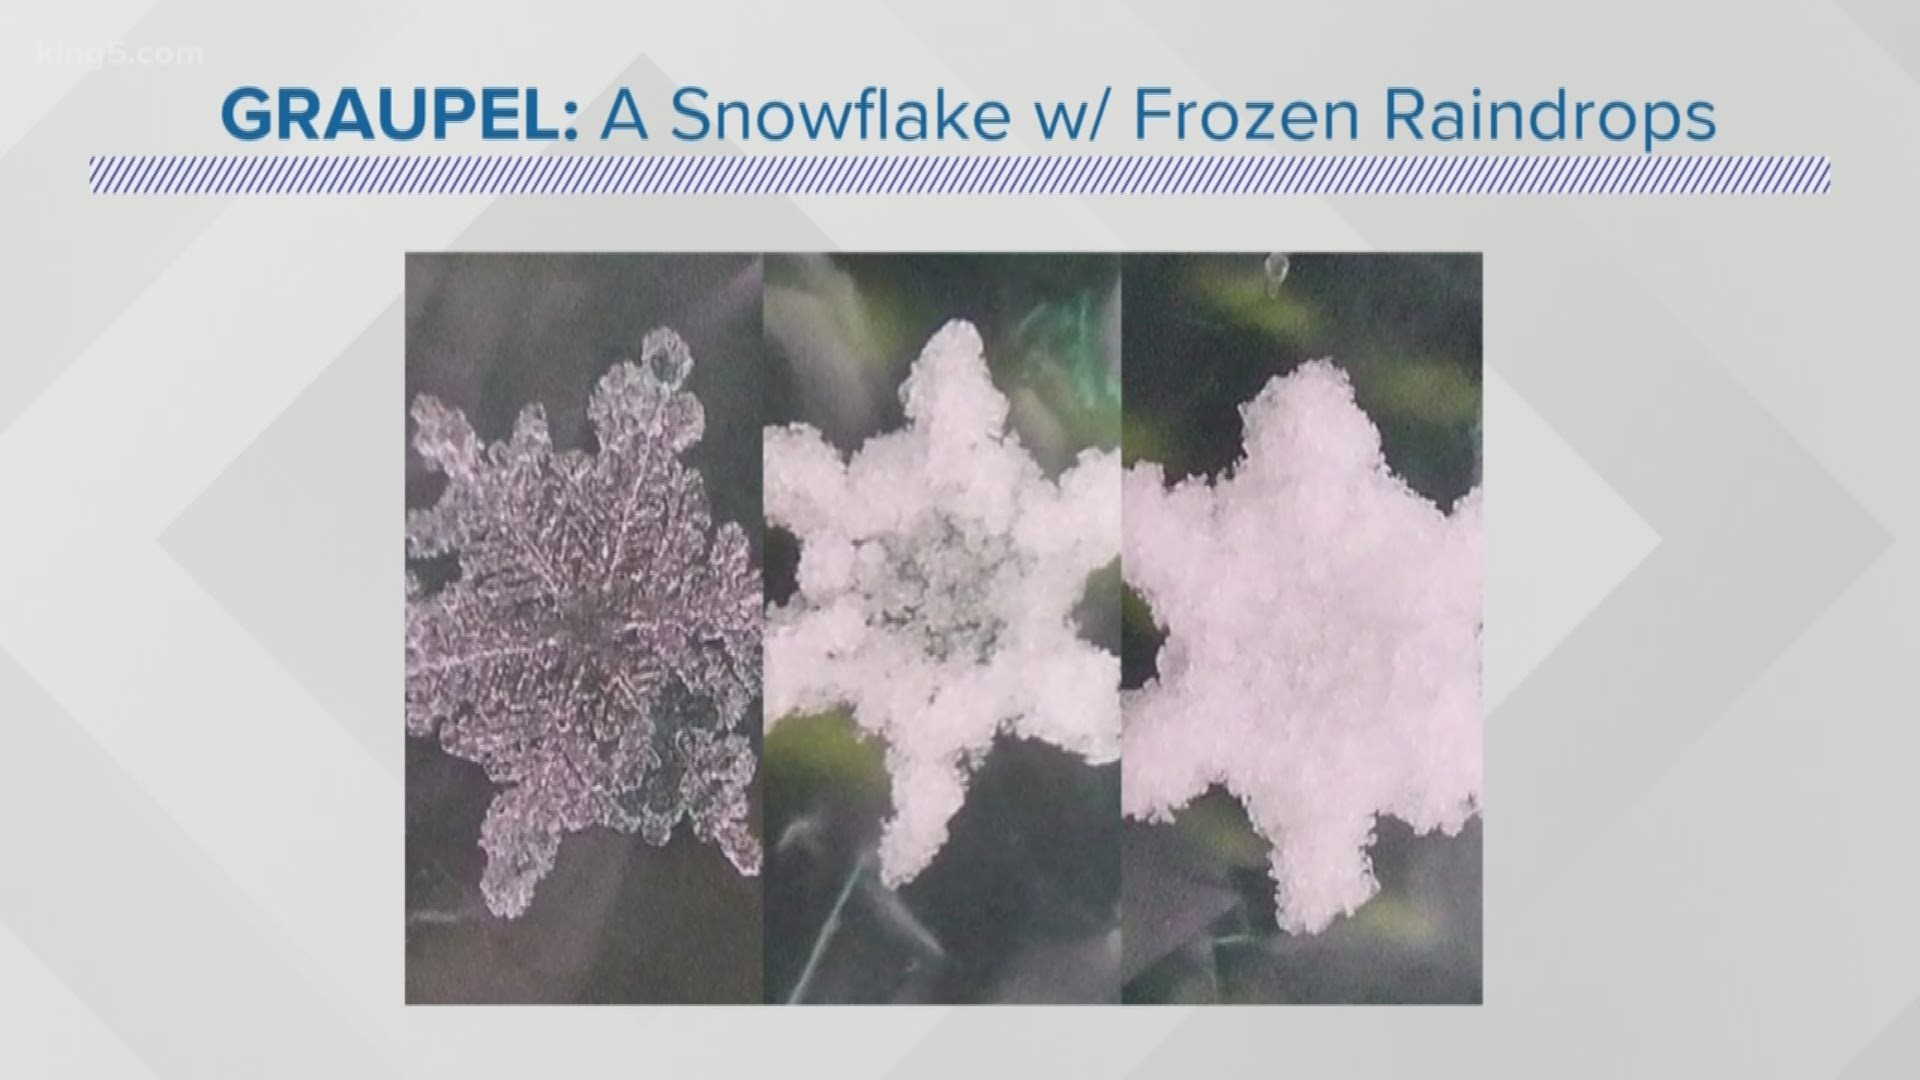 Graupel (a.k.a. soft hail or snow pellets) are soft small pellets of ice created when supercooled water droplets coat a snowflake.